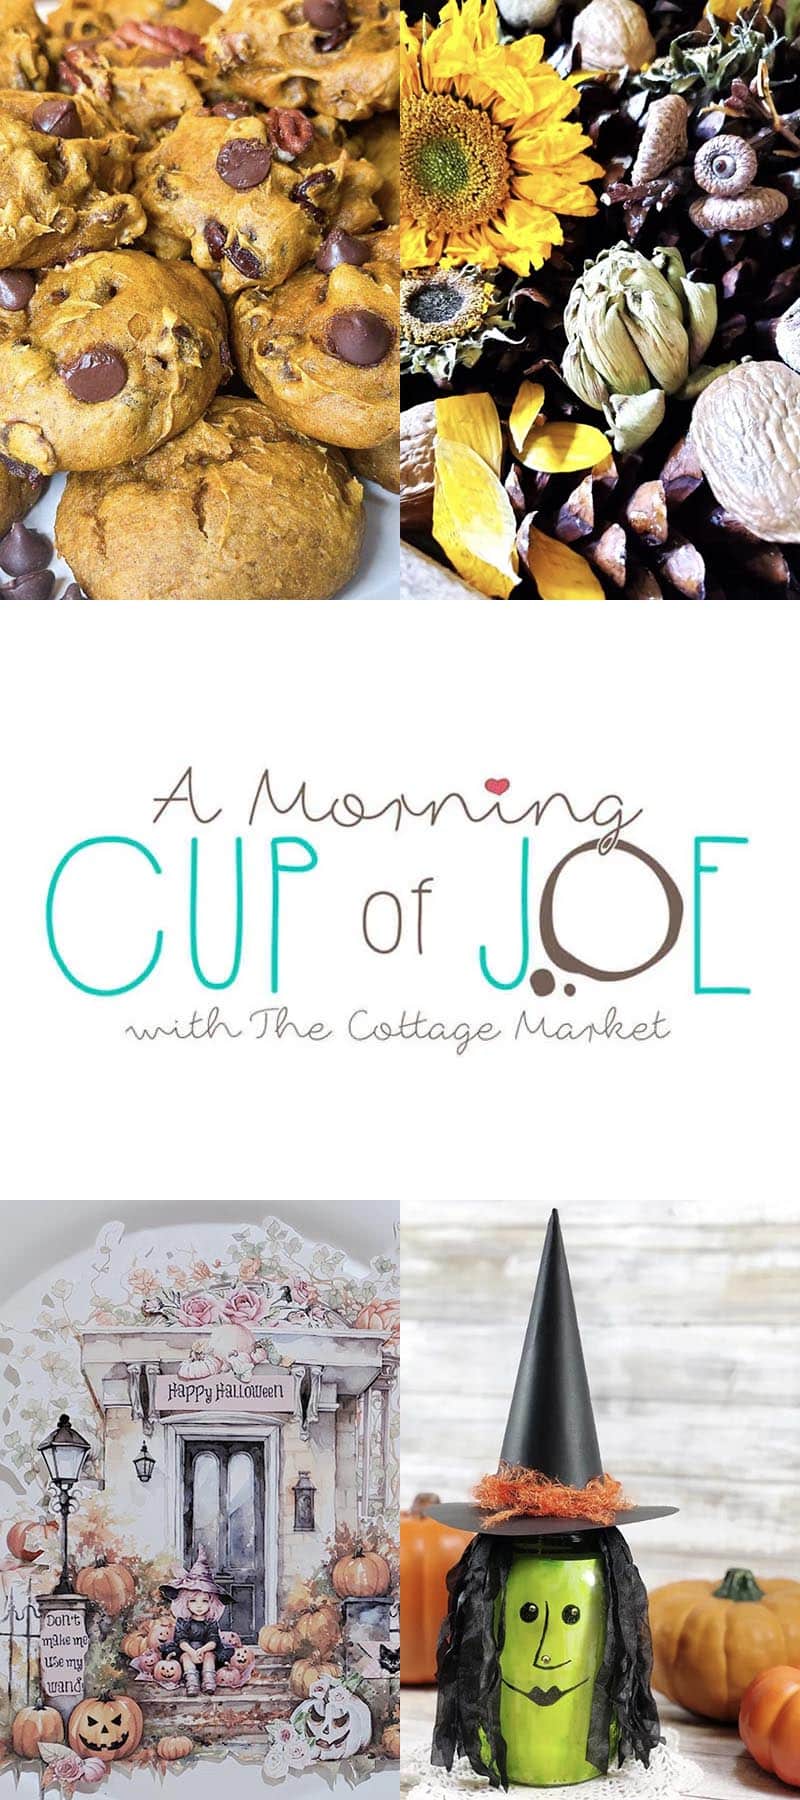 Explore DIY projects, recipes & home decor ideas in our weekly 'Morning Cup of Joe.' Creative inspiration awaits!